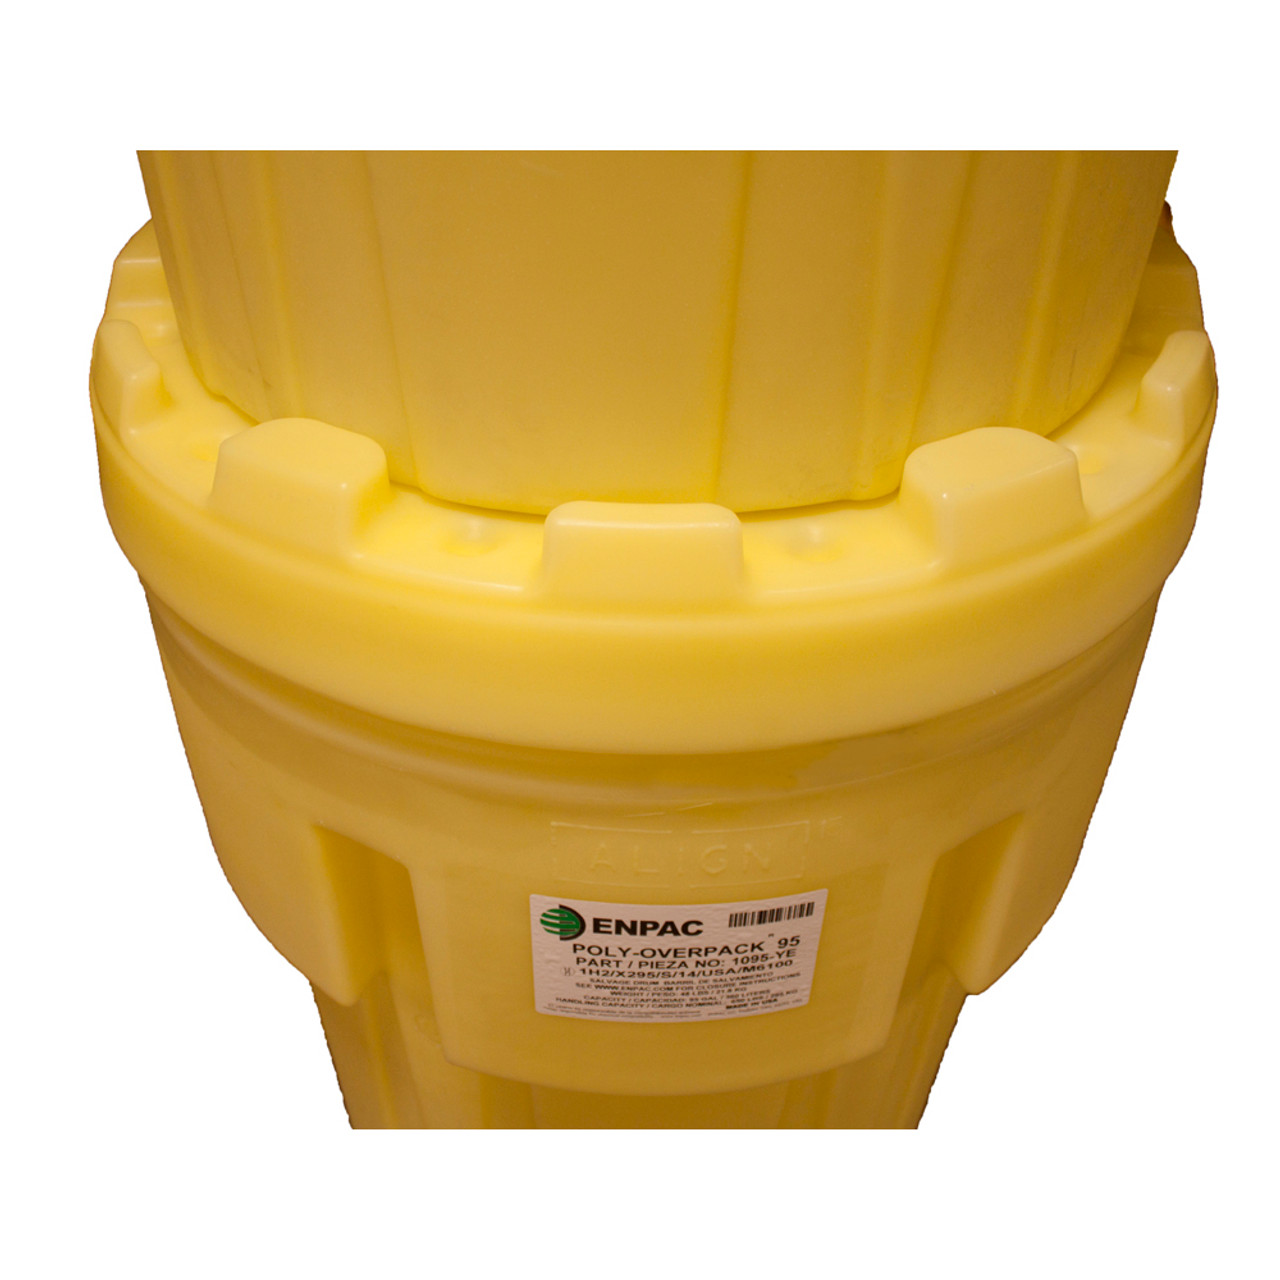 95 Gallon Poly Overpack Salvage Drum, 360 litre